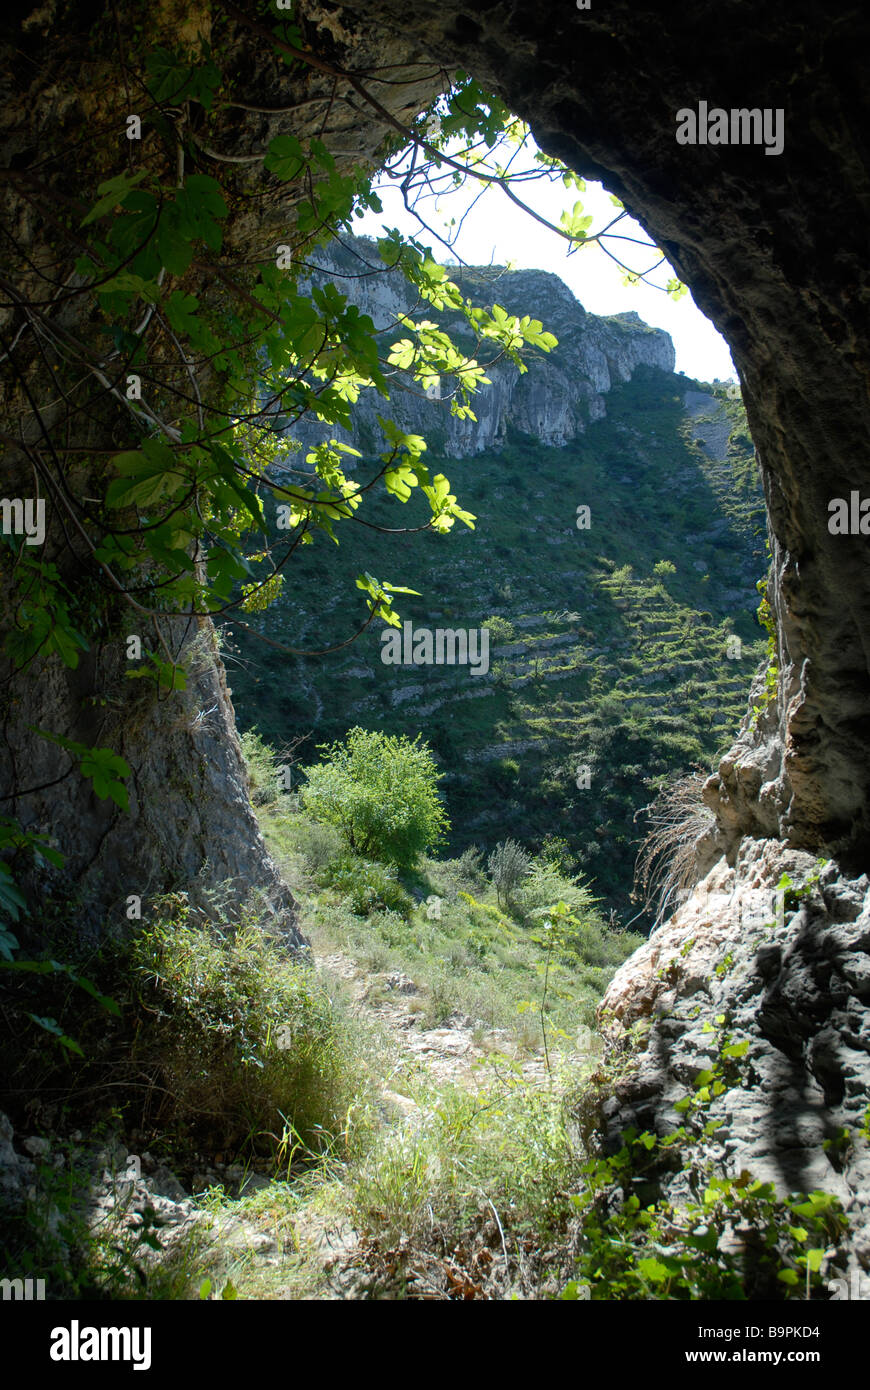 looking out of a cave off a Mozarabic trail, Vall de Laguart, Benimaurell, Alicante Province, Comunidad Valenciana, Spain Stock Photo